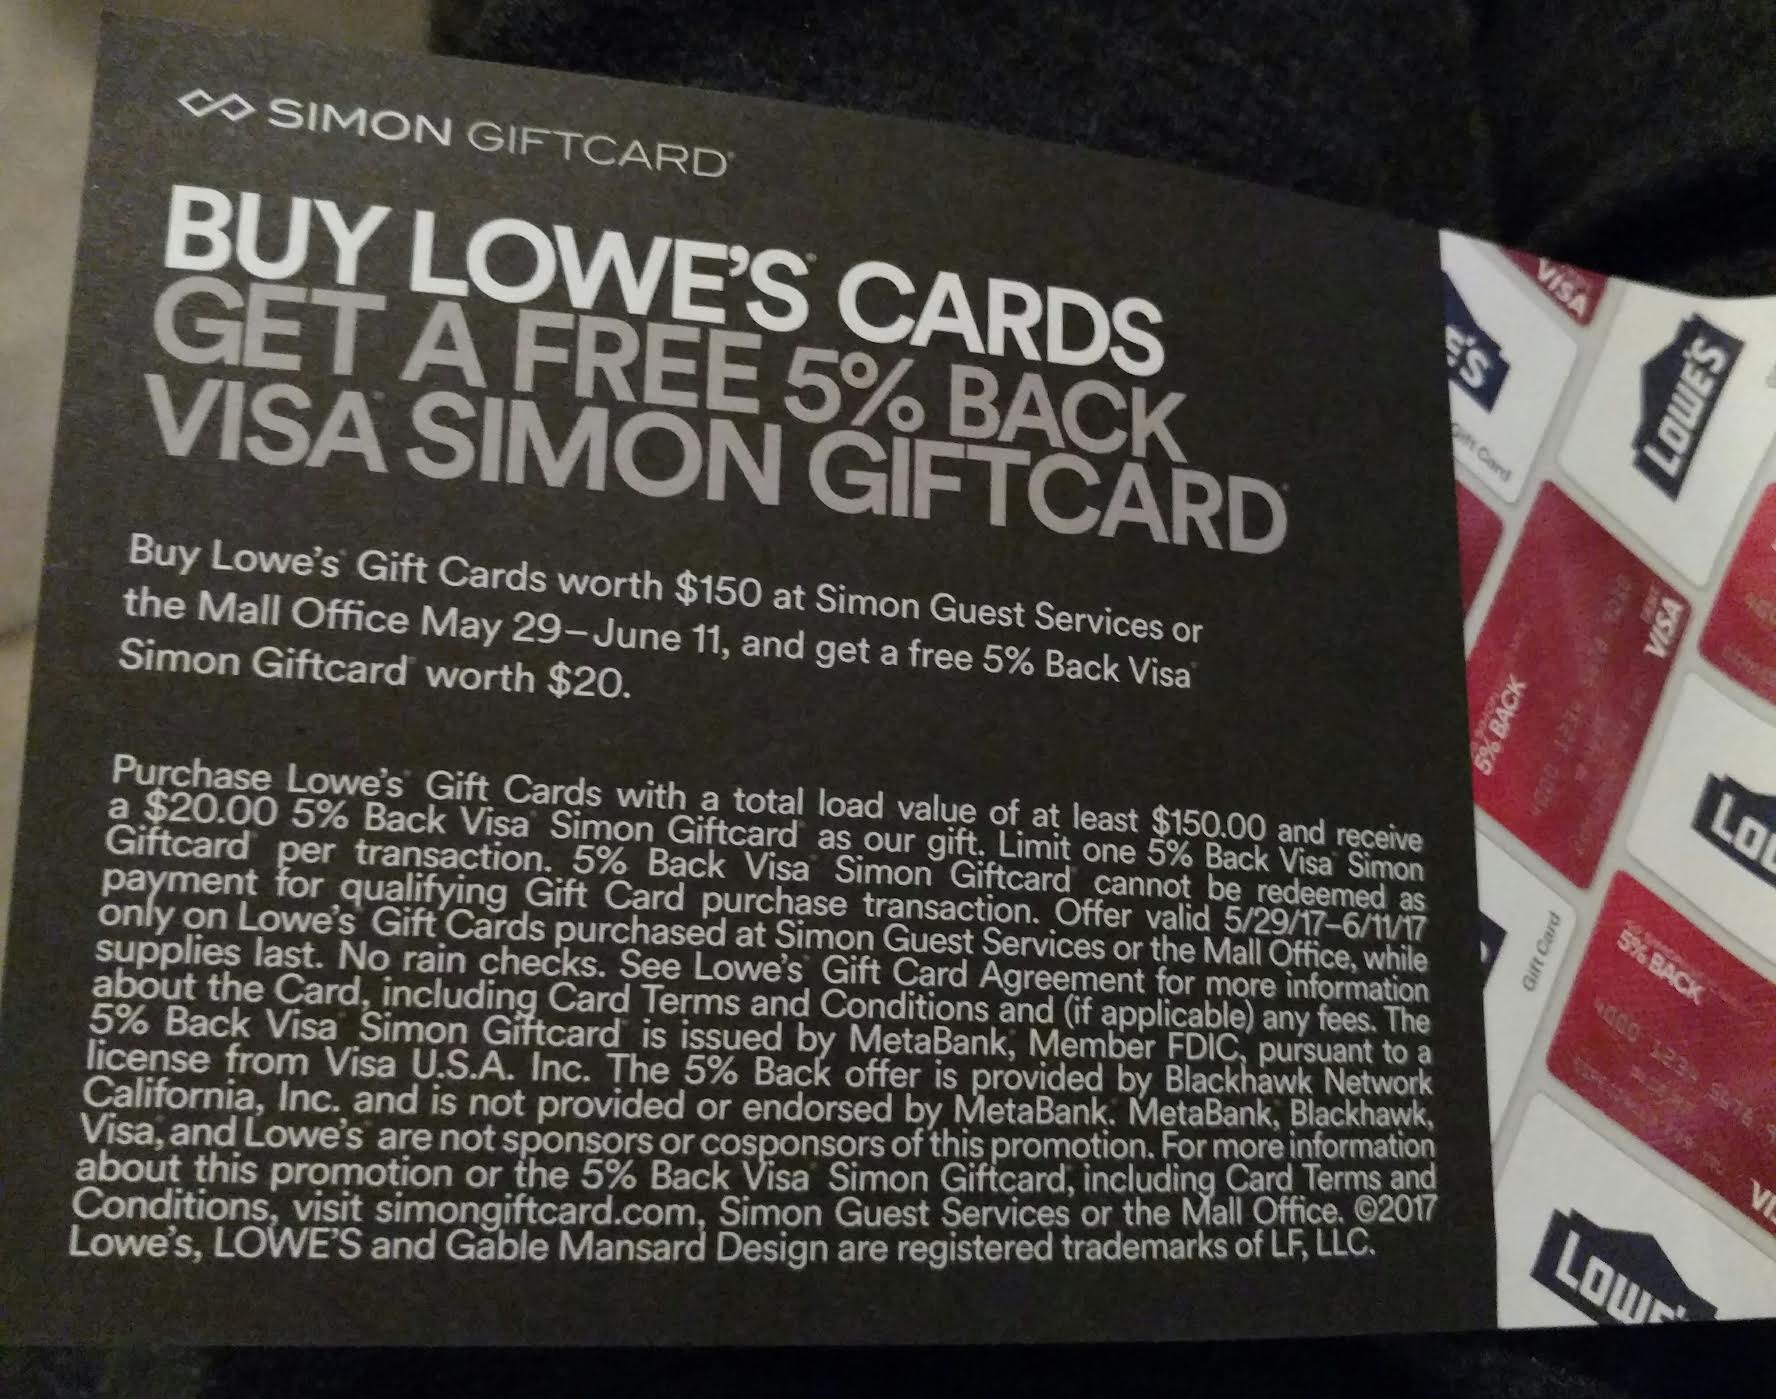 150 In Itunes Gift Cards And Get A Free 20 Visa Amex Card Valid 5 15 28